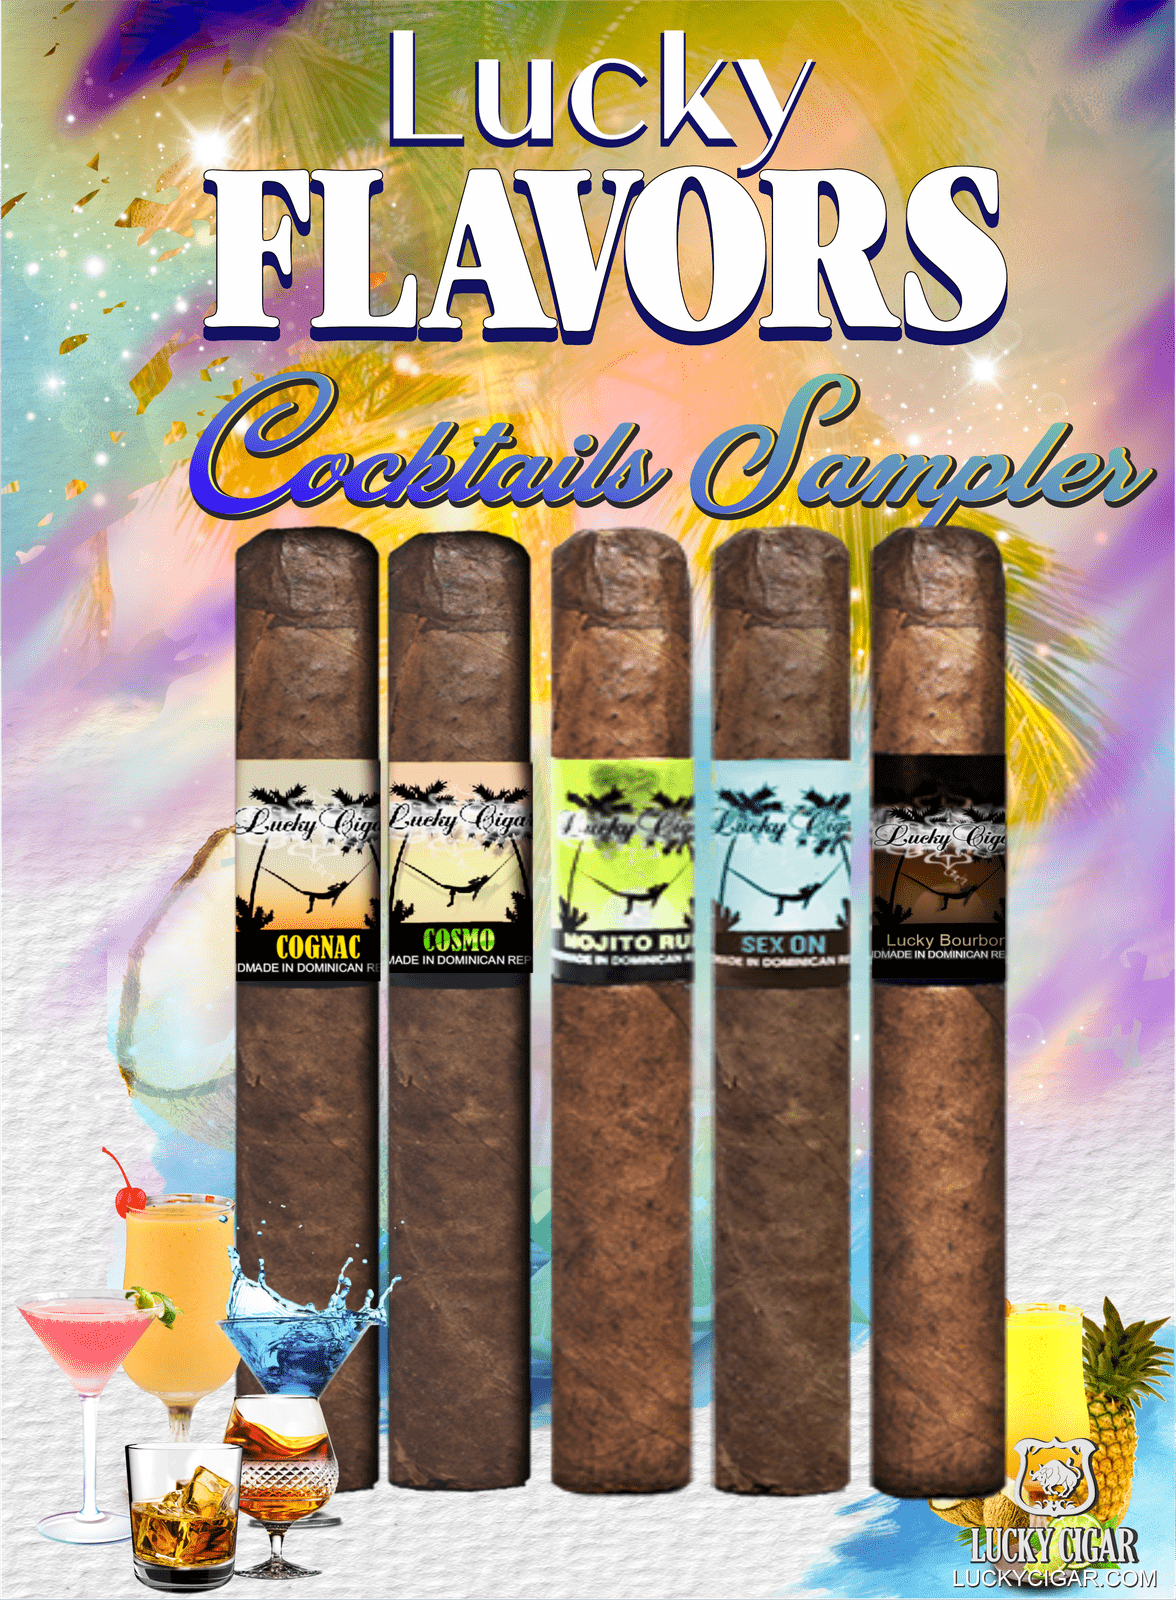 Flavored Cigars: Lucky Flavors 5 Piece Cocktails Sampler, Cognac, Cosmo, Mojito, Bourbon, SOTB